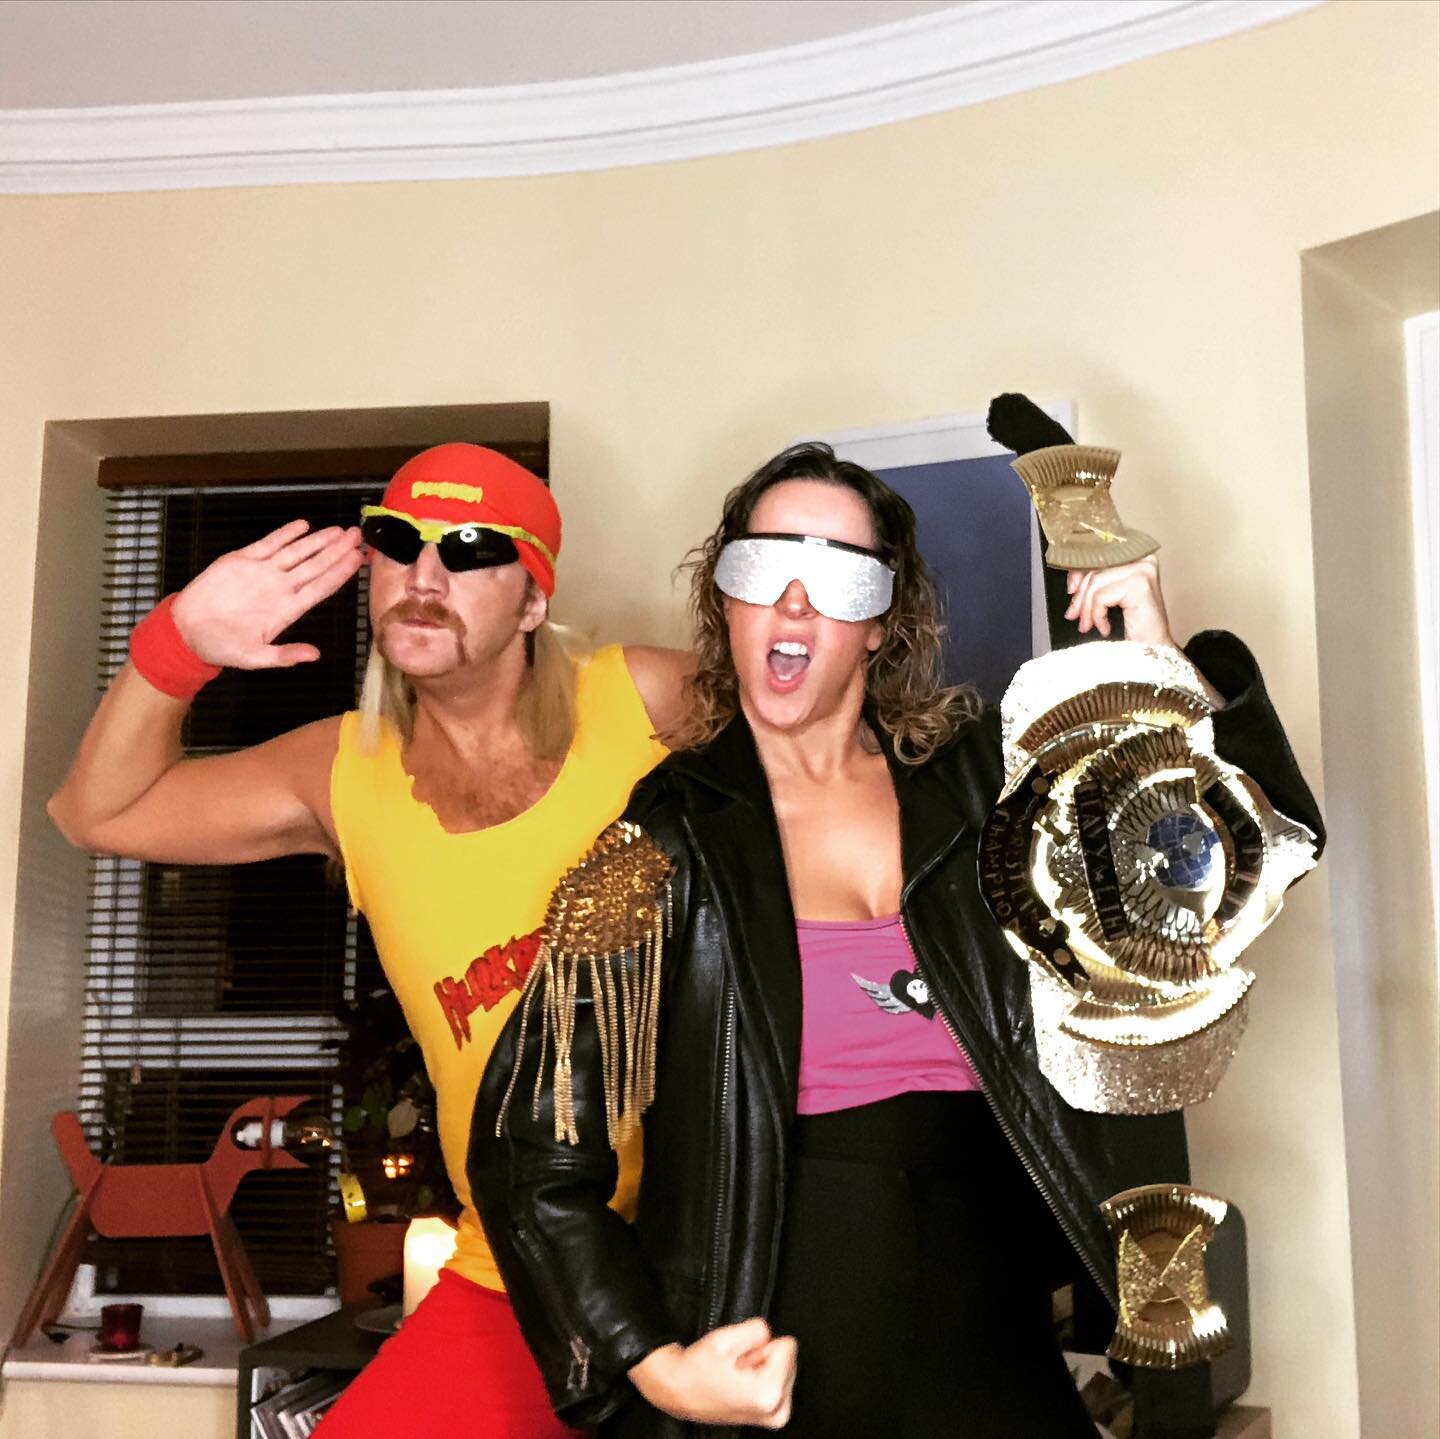 We basically built this whole look around @shanetob&lsquo;s moustache. I had a lot of time on my hands this week so it escalated wildly into making a wrestling belt out of gold paper plates and hand painting a hulkamania T-shirt. We then proceeded to